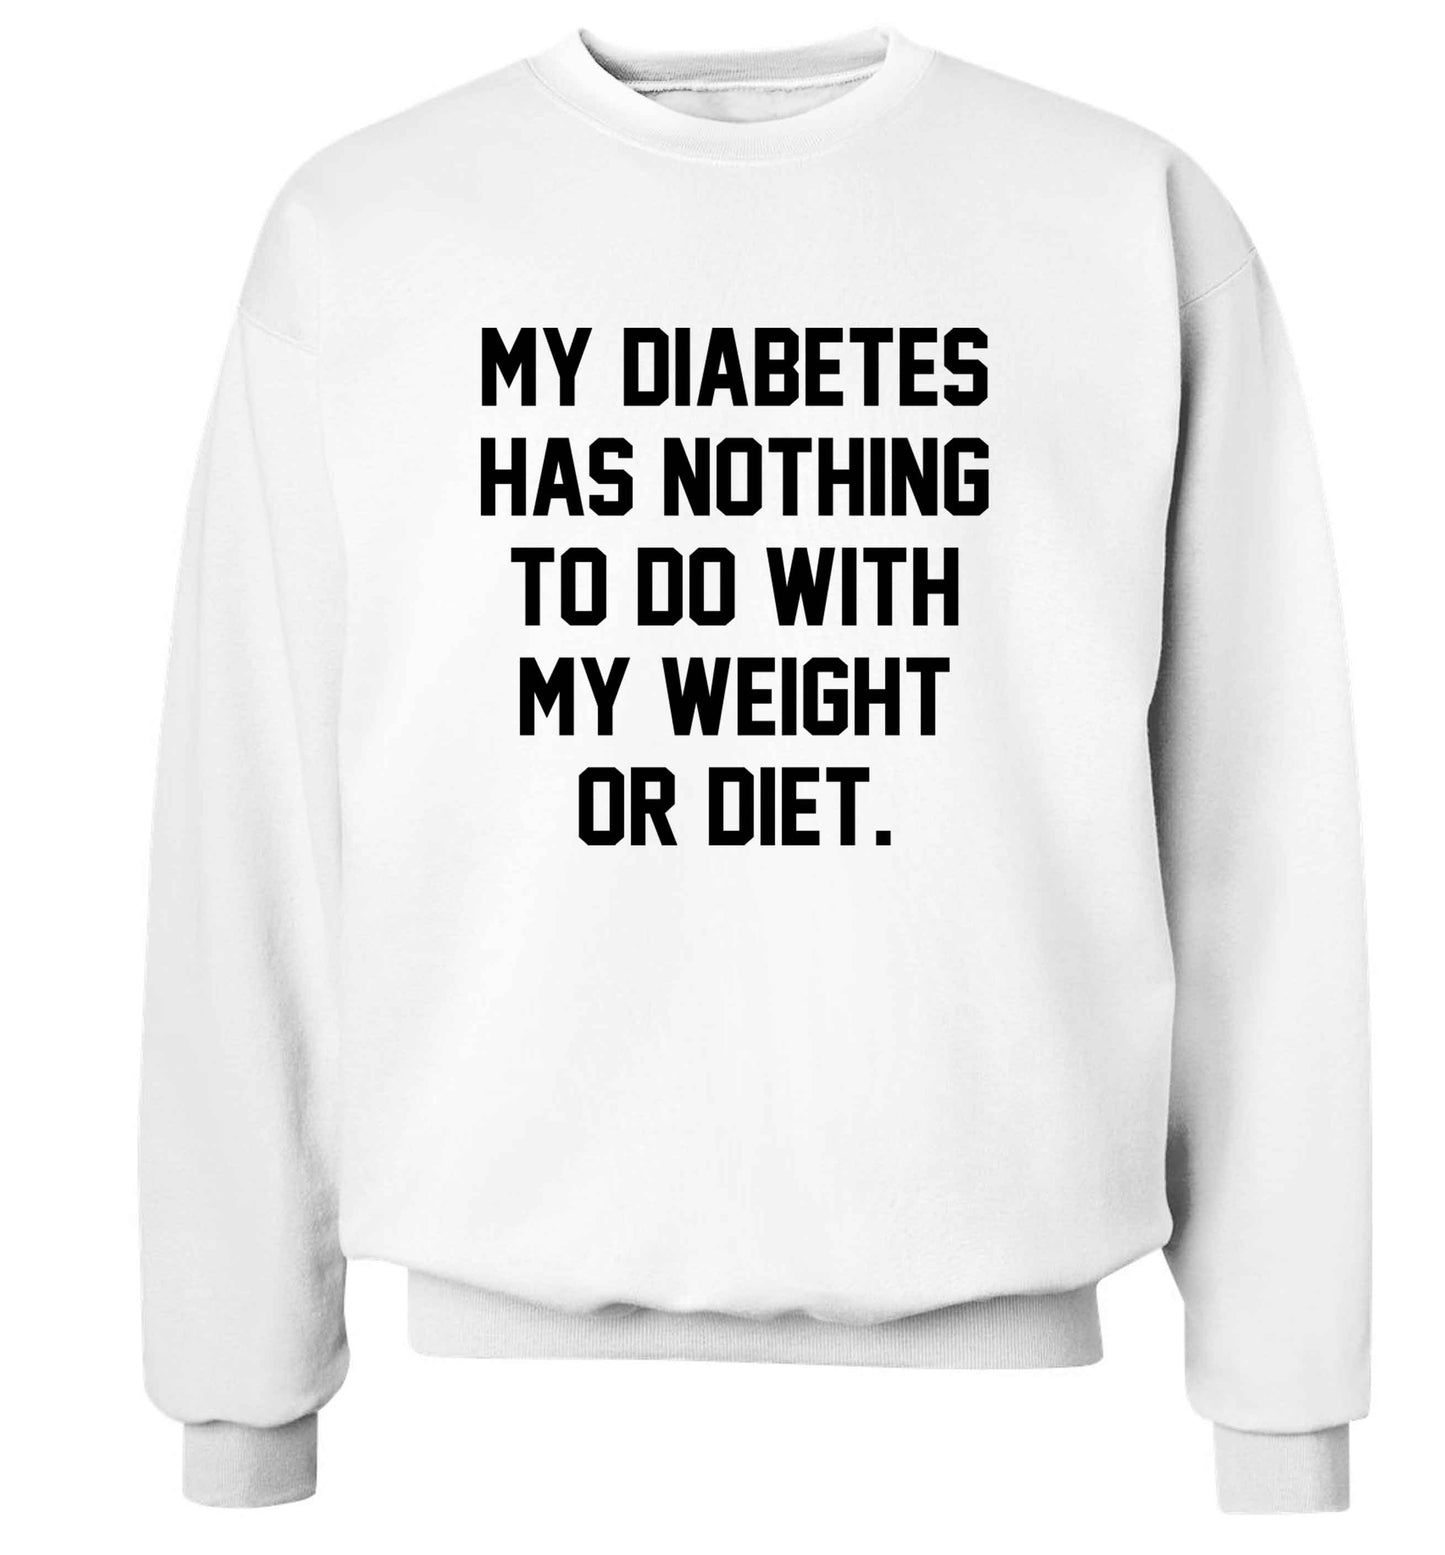 My diabetes has nothing to do with my weight or diet adult's unisex white sweater 2XL